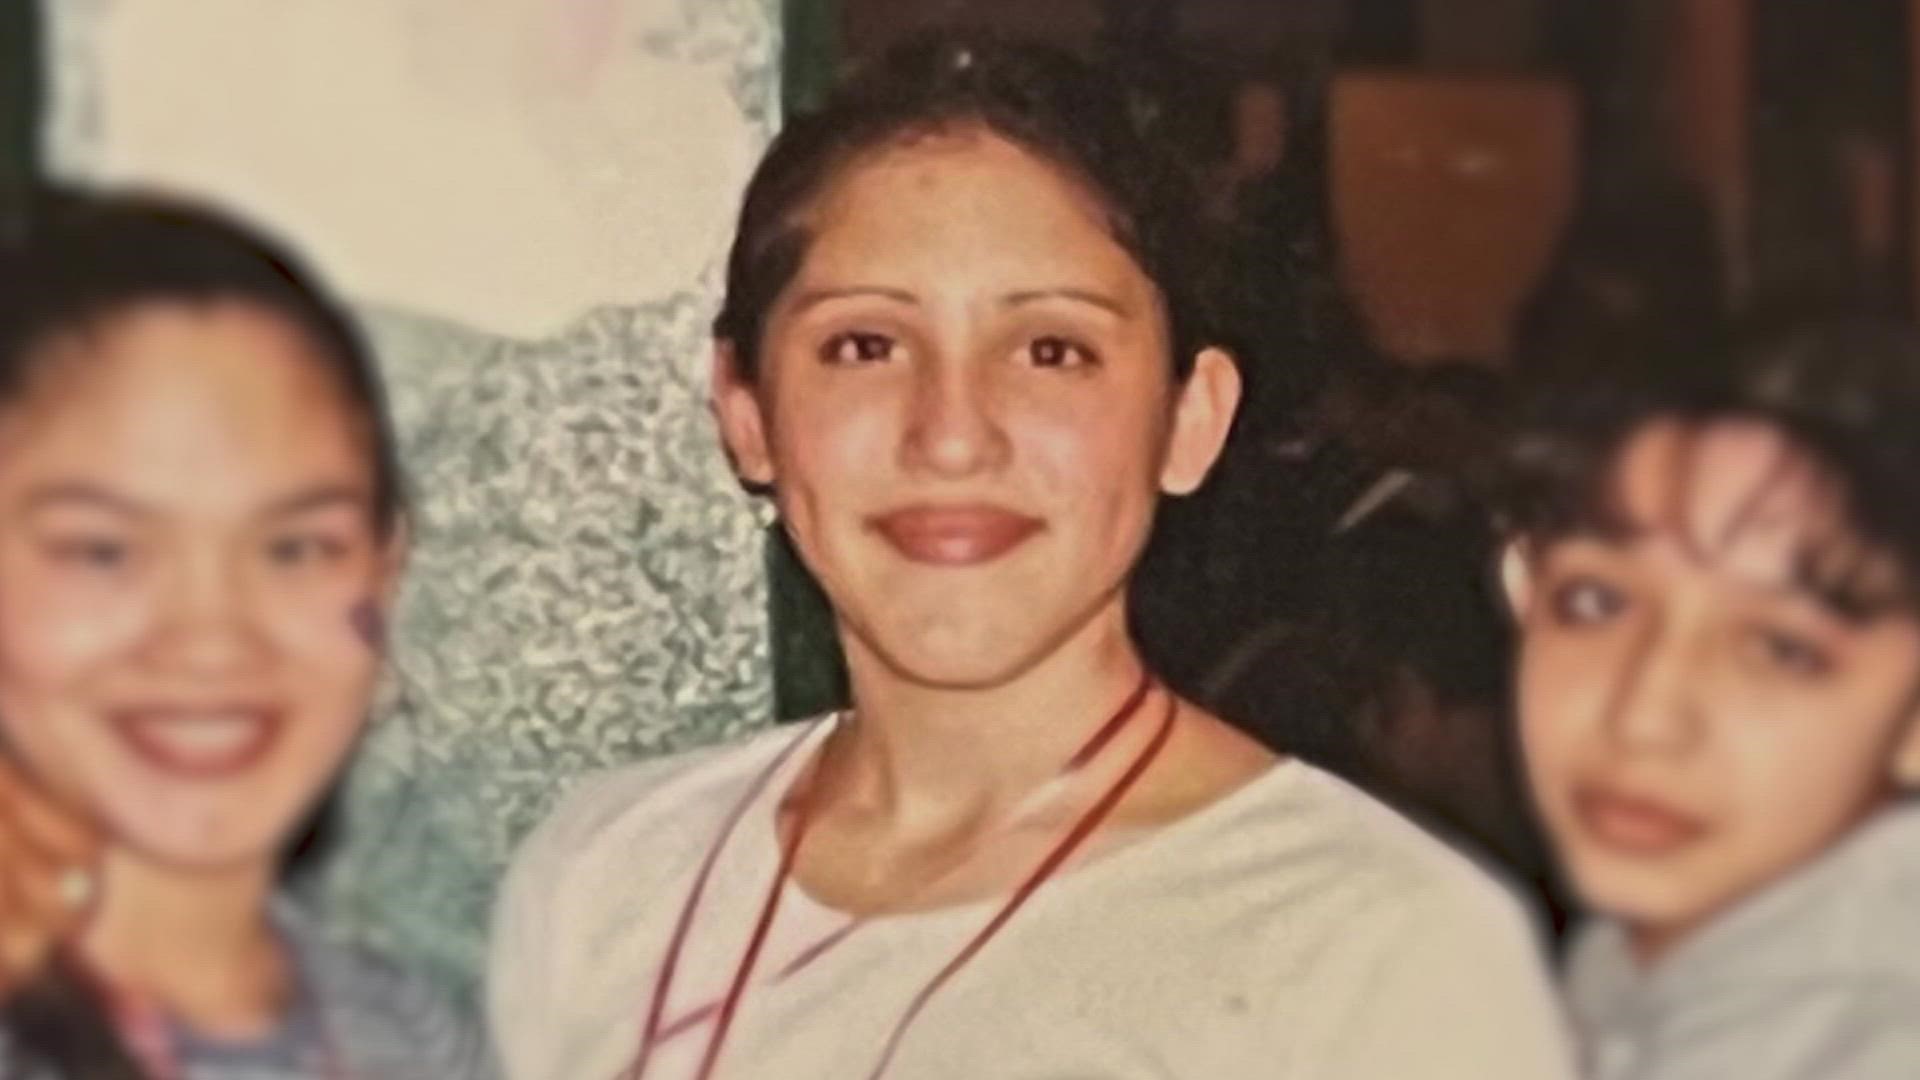 On June 7, 1997, the body of Erica Garcia was found in the abandoned Alief General Hospital building.